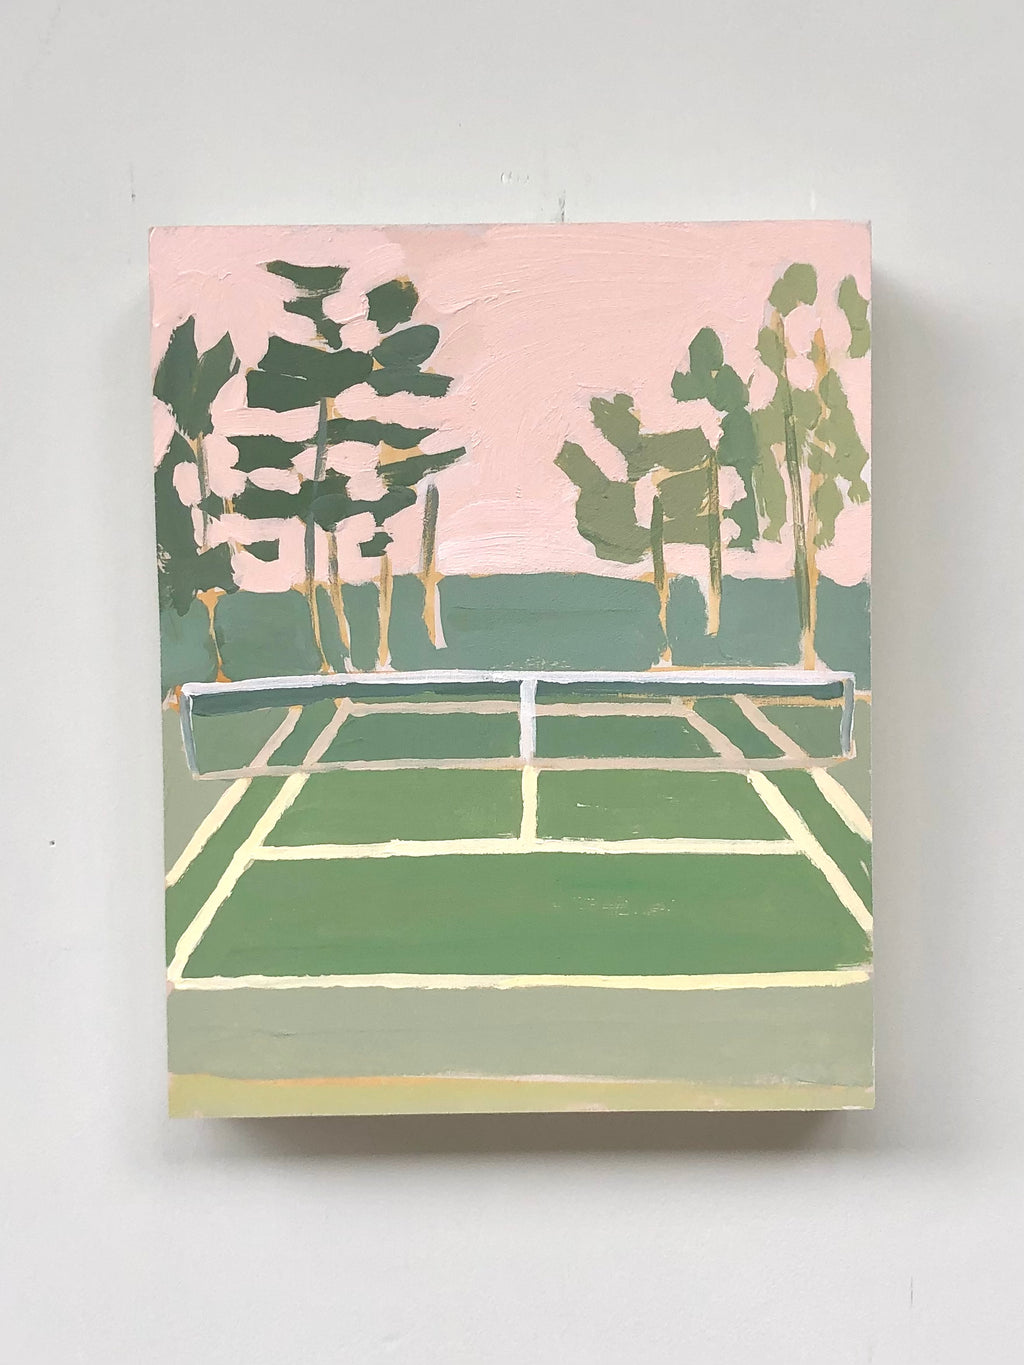 Tennis and Golf No. 28 - 8x10